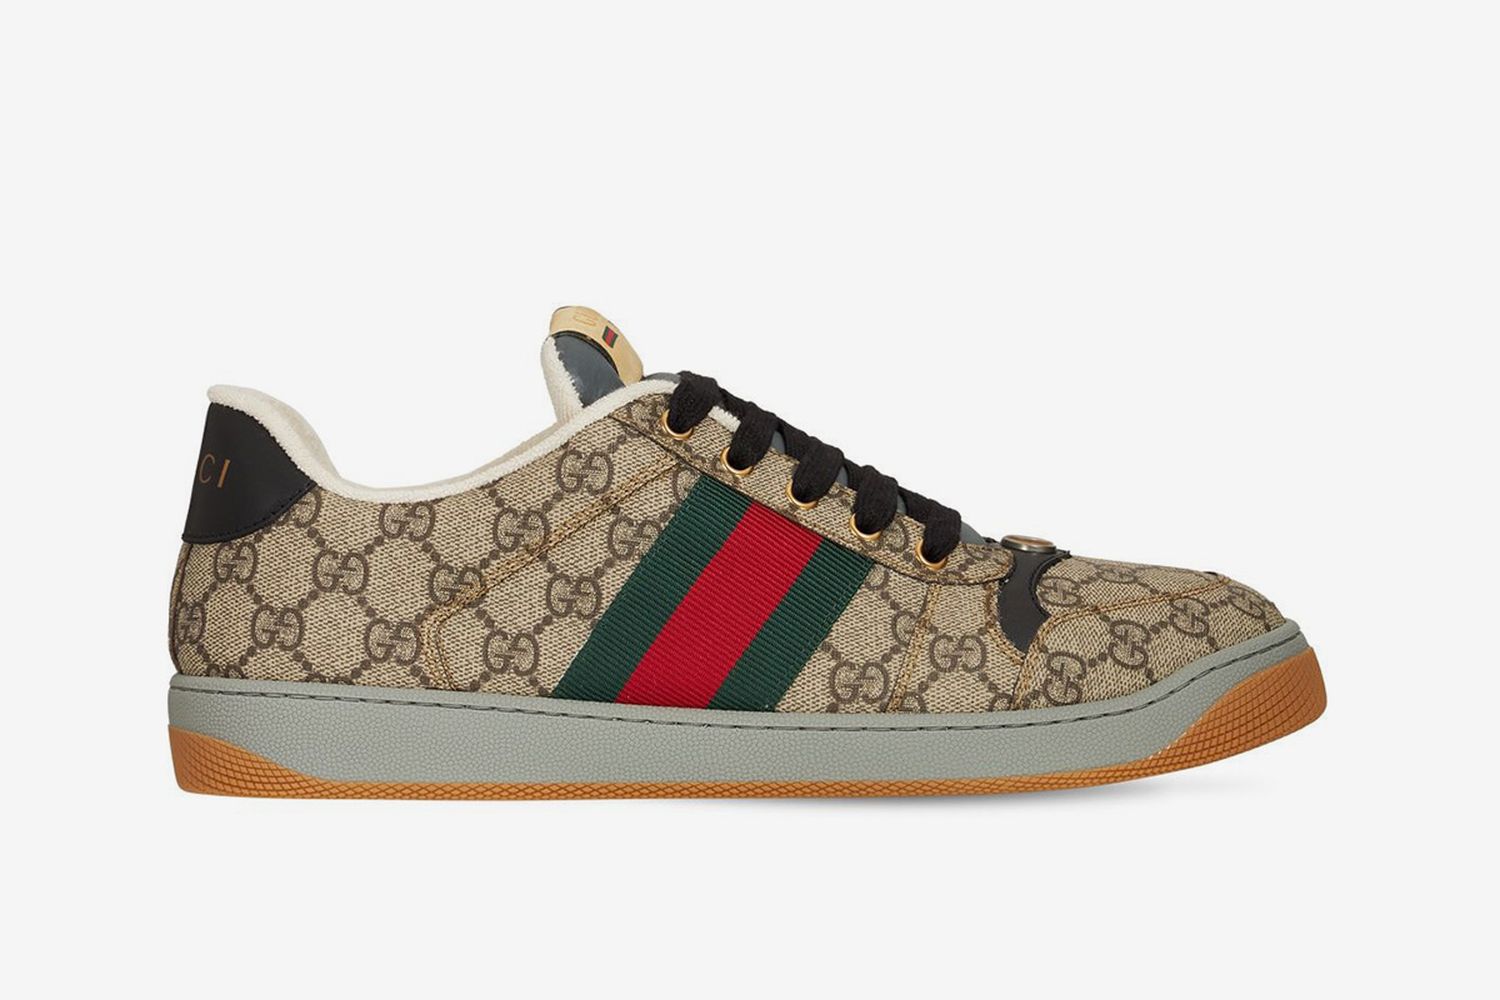 delikat Cosmic bakke The Ultimate Guide to Gucci Sneakers & Where to Buy Them